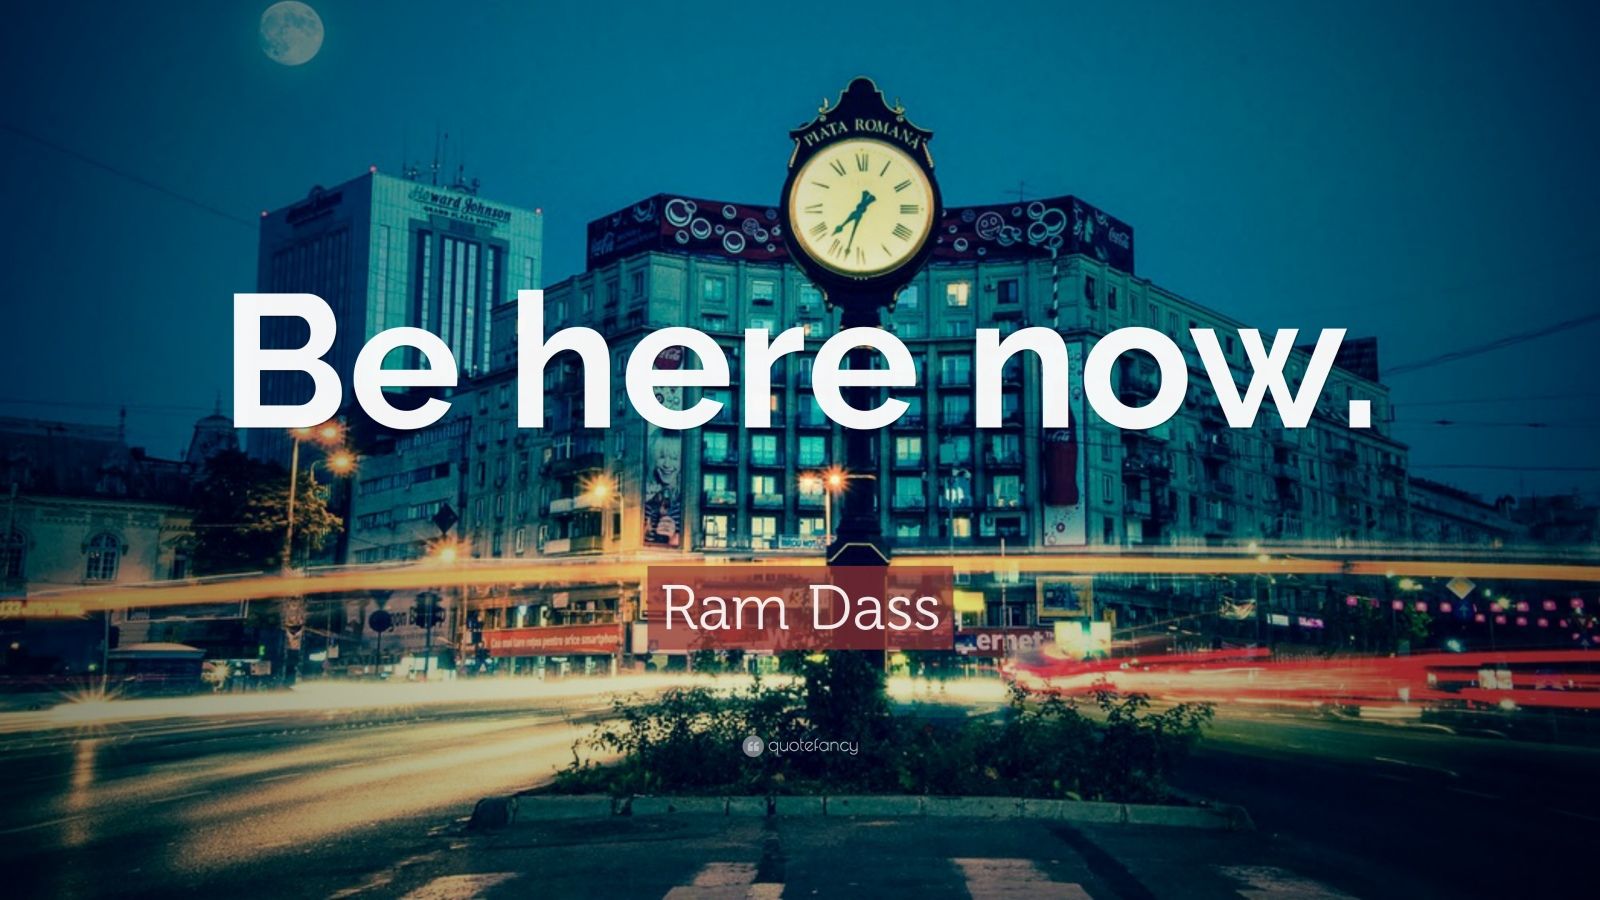 ram dass remember be here now